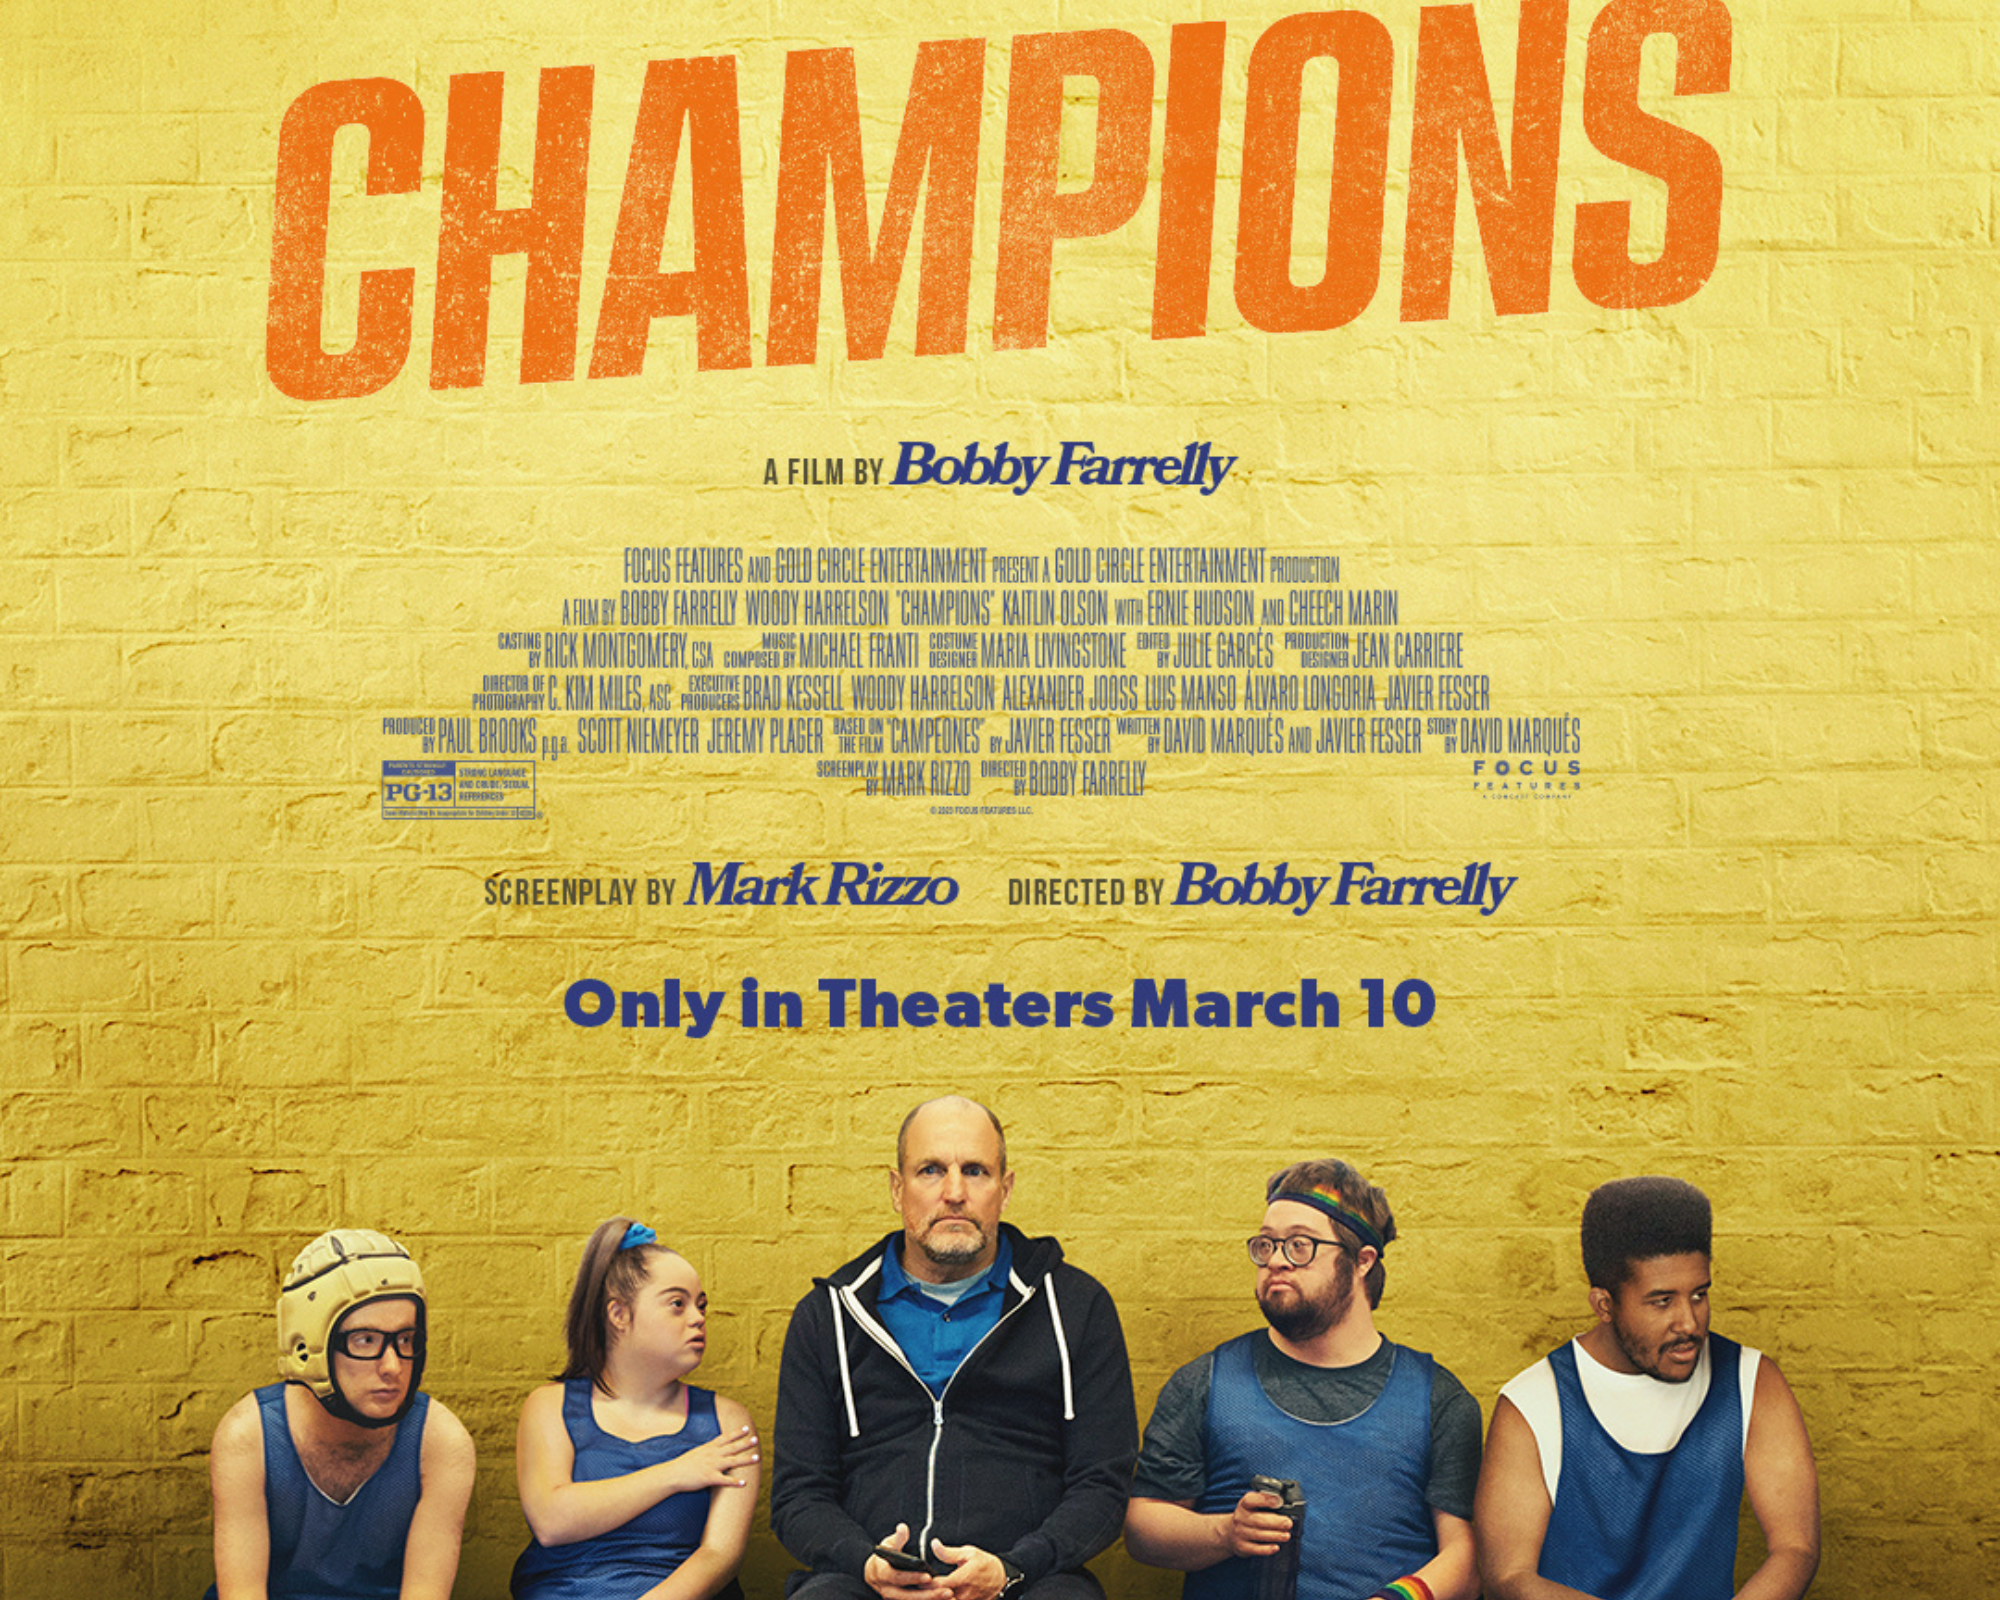 A colorful movie poster for movie Champions with Woody Harrelson.